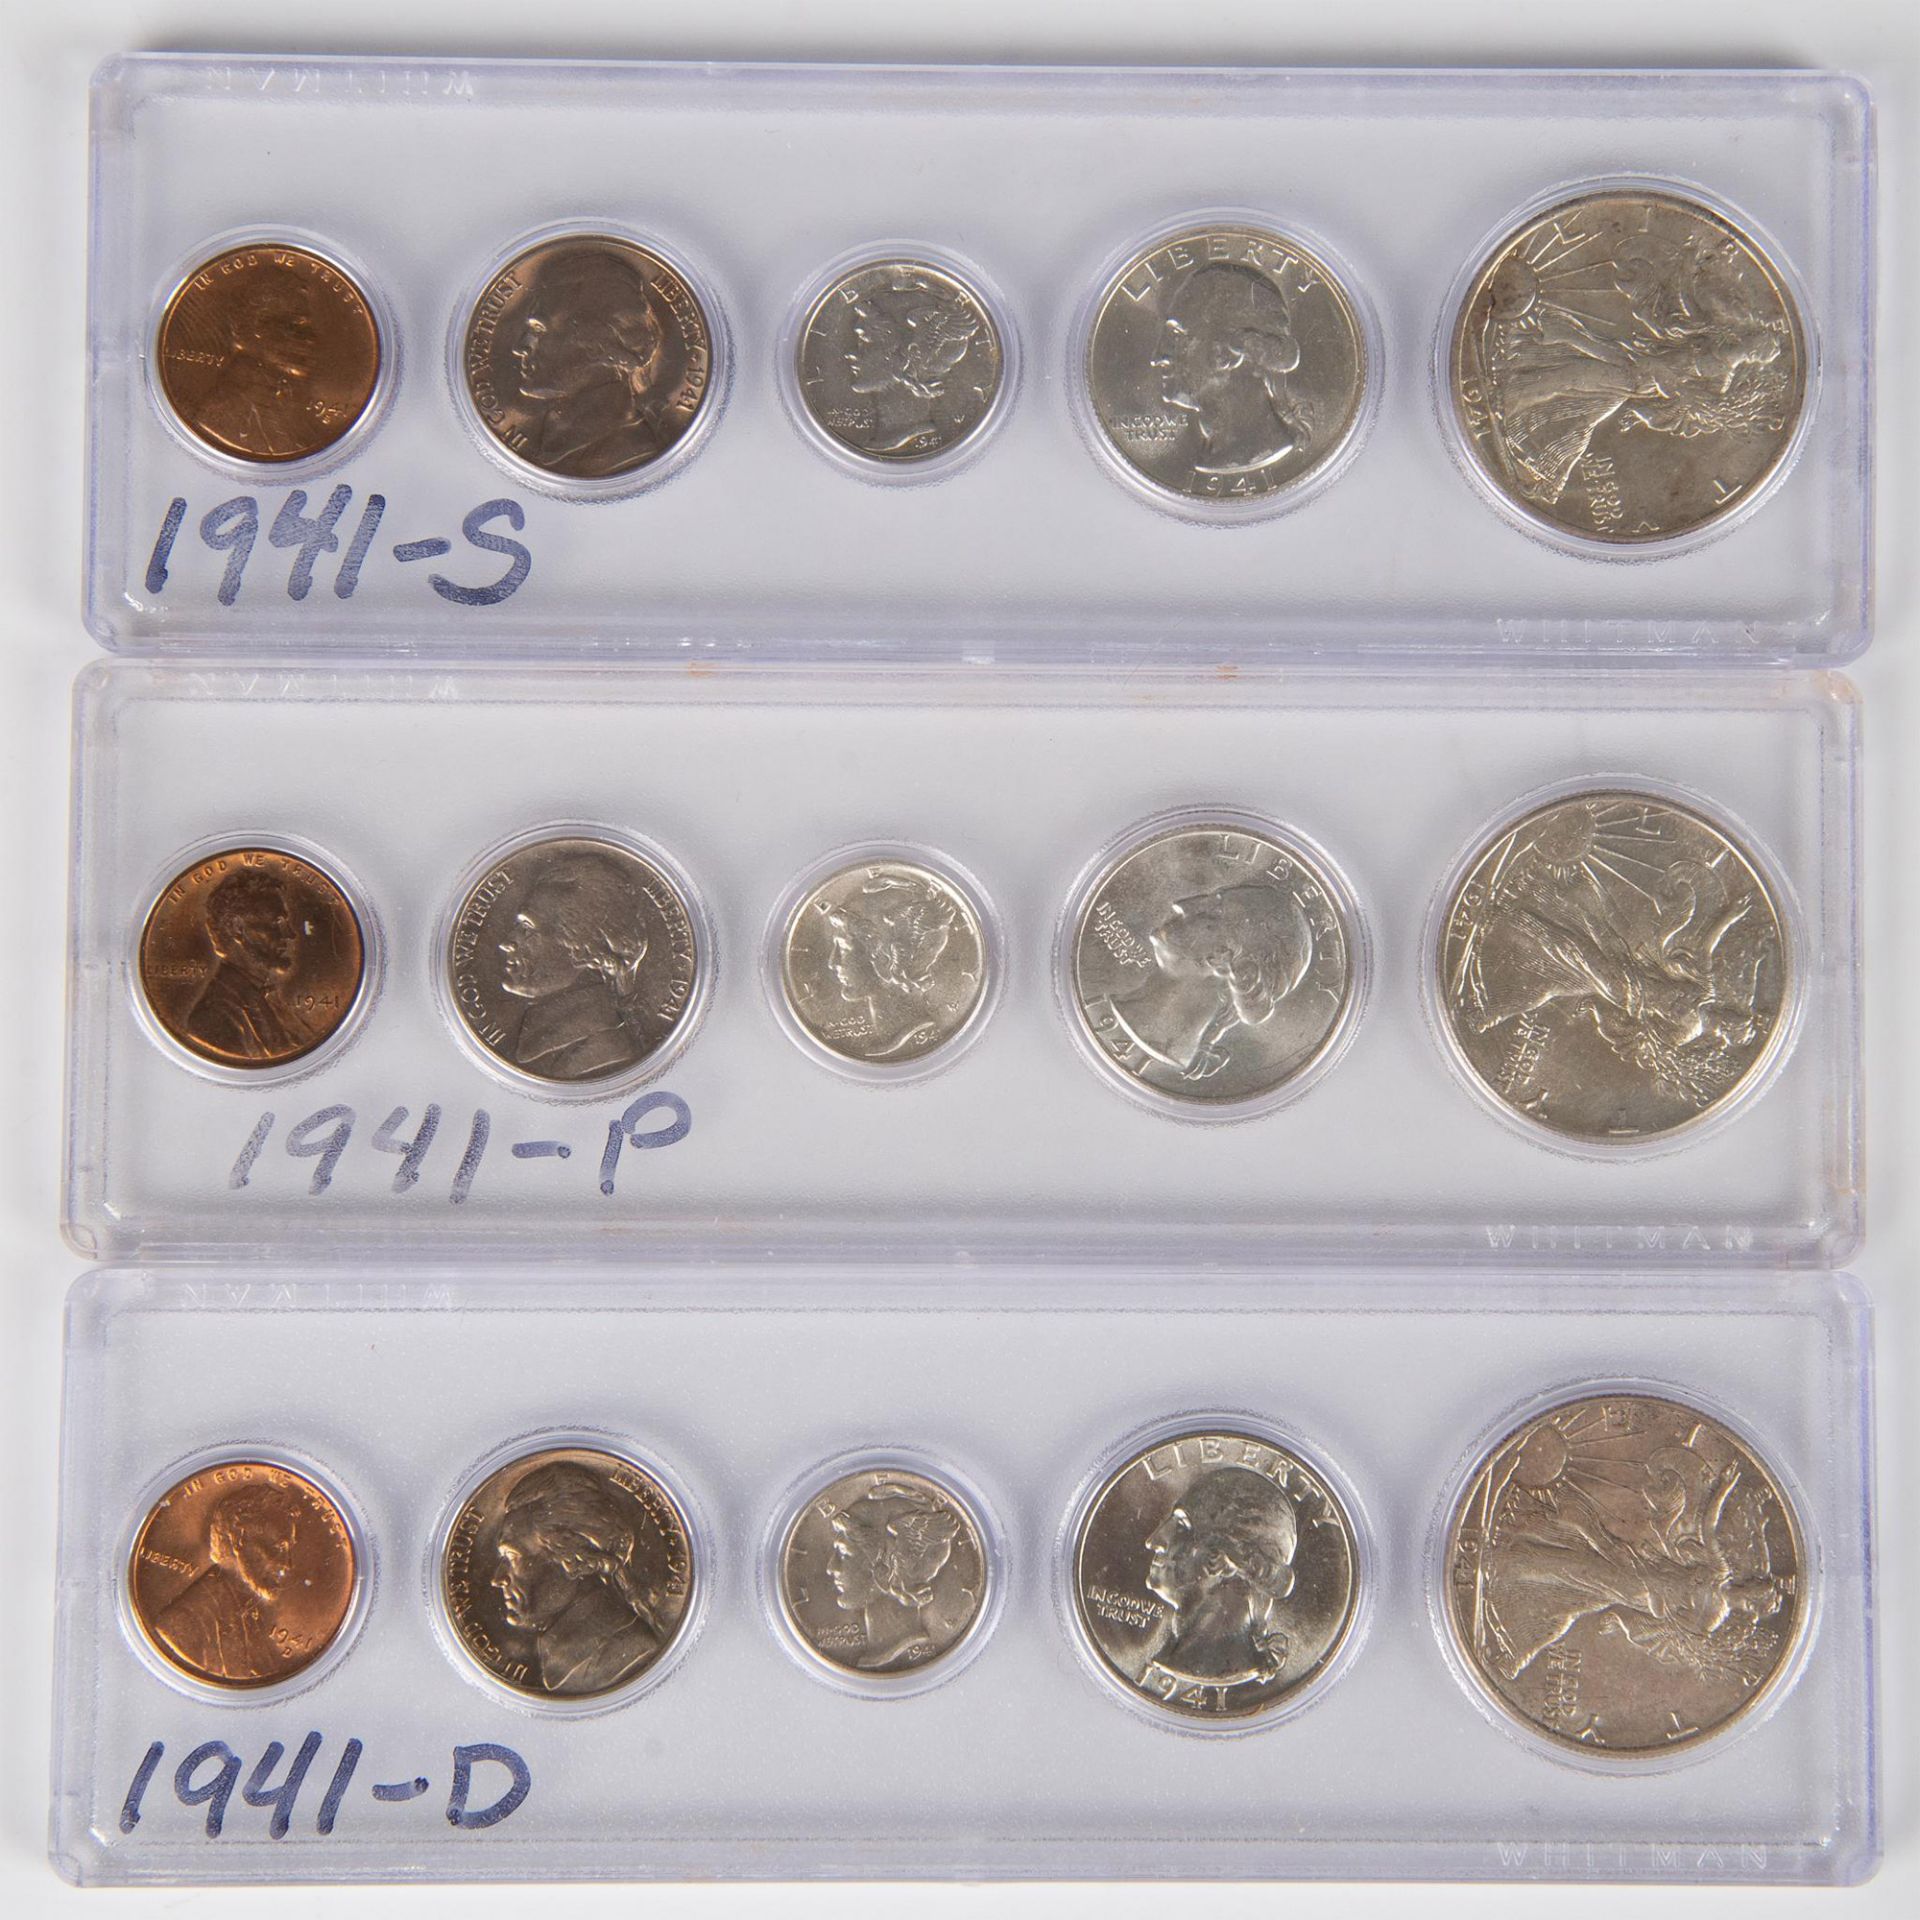 152PC COLLECTION OF US COINS FROM YEARS 1940-1949 - Image 7 of 20